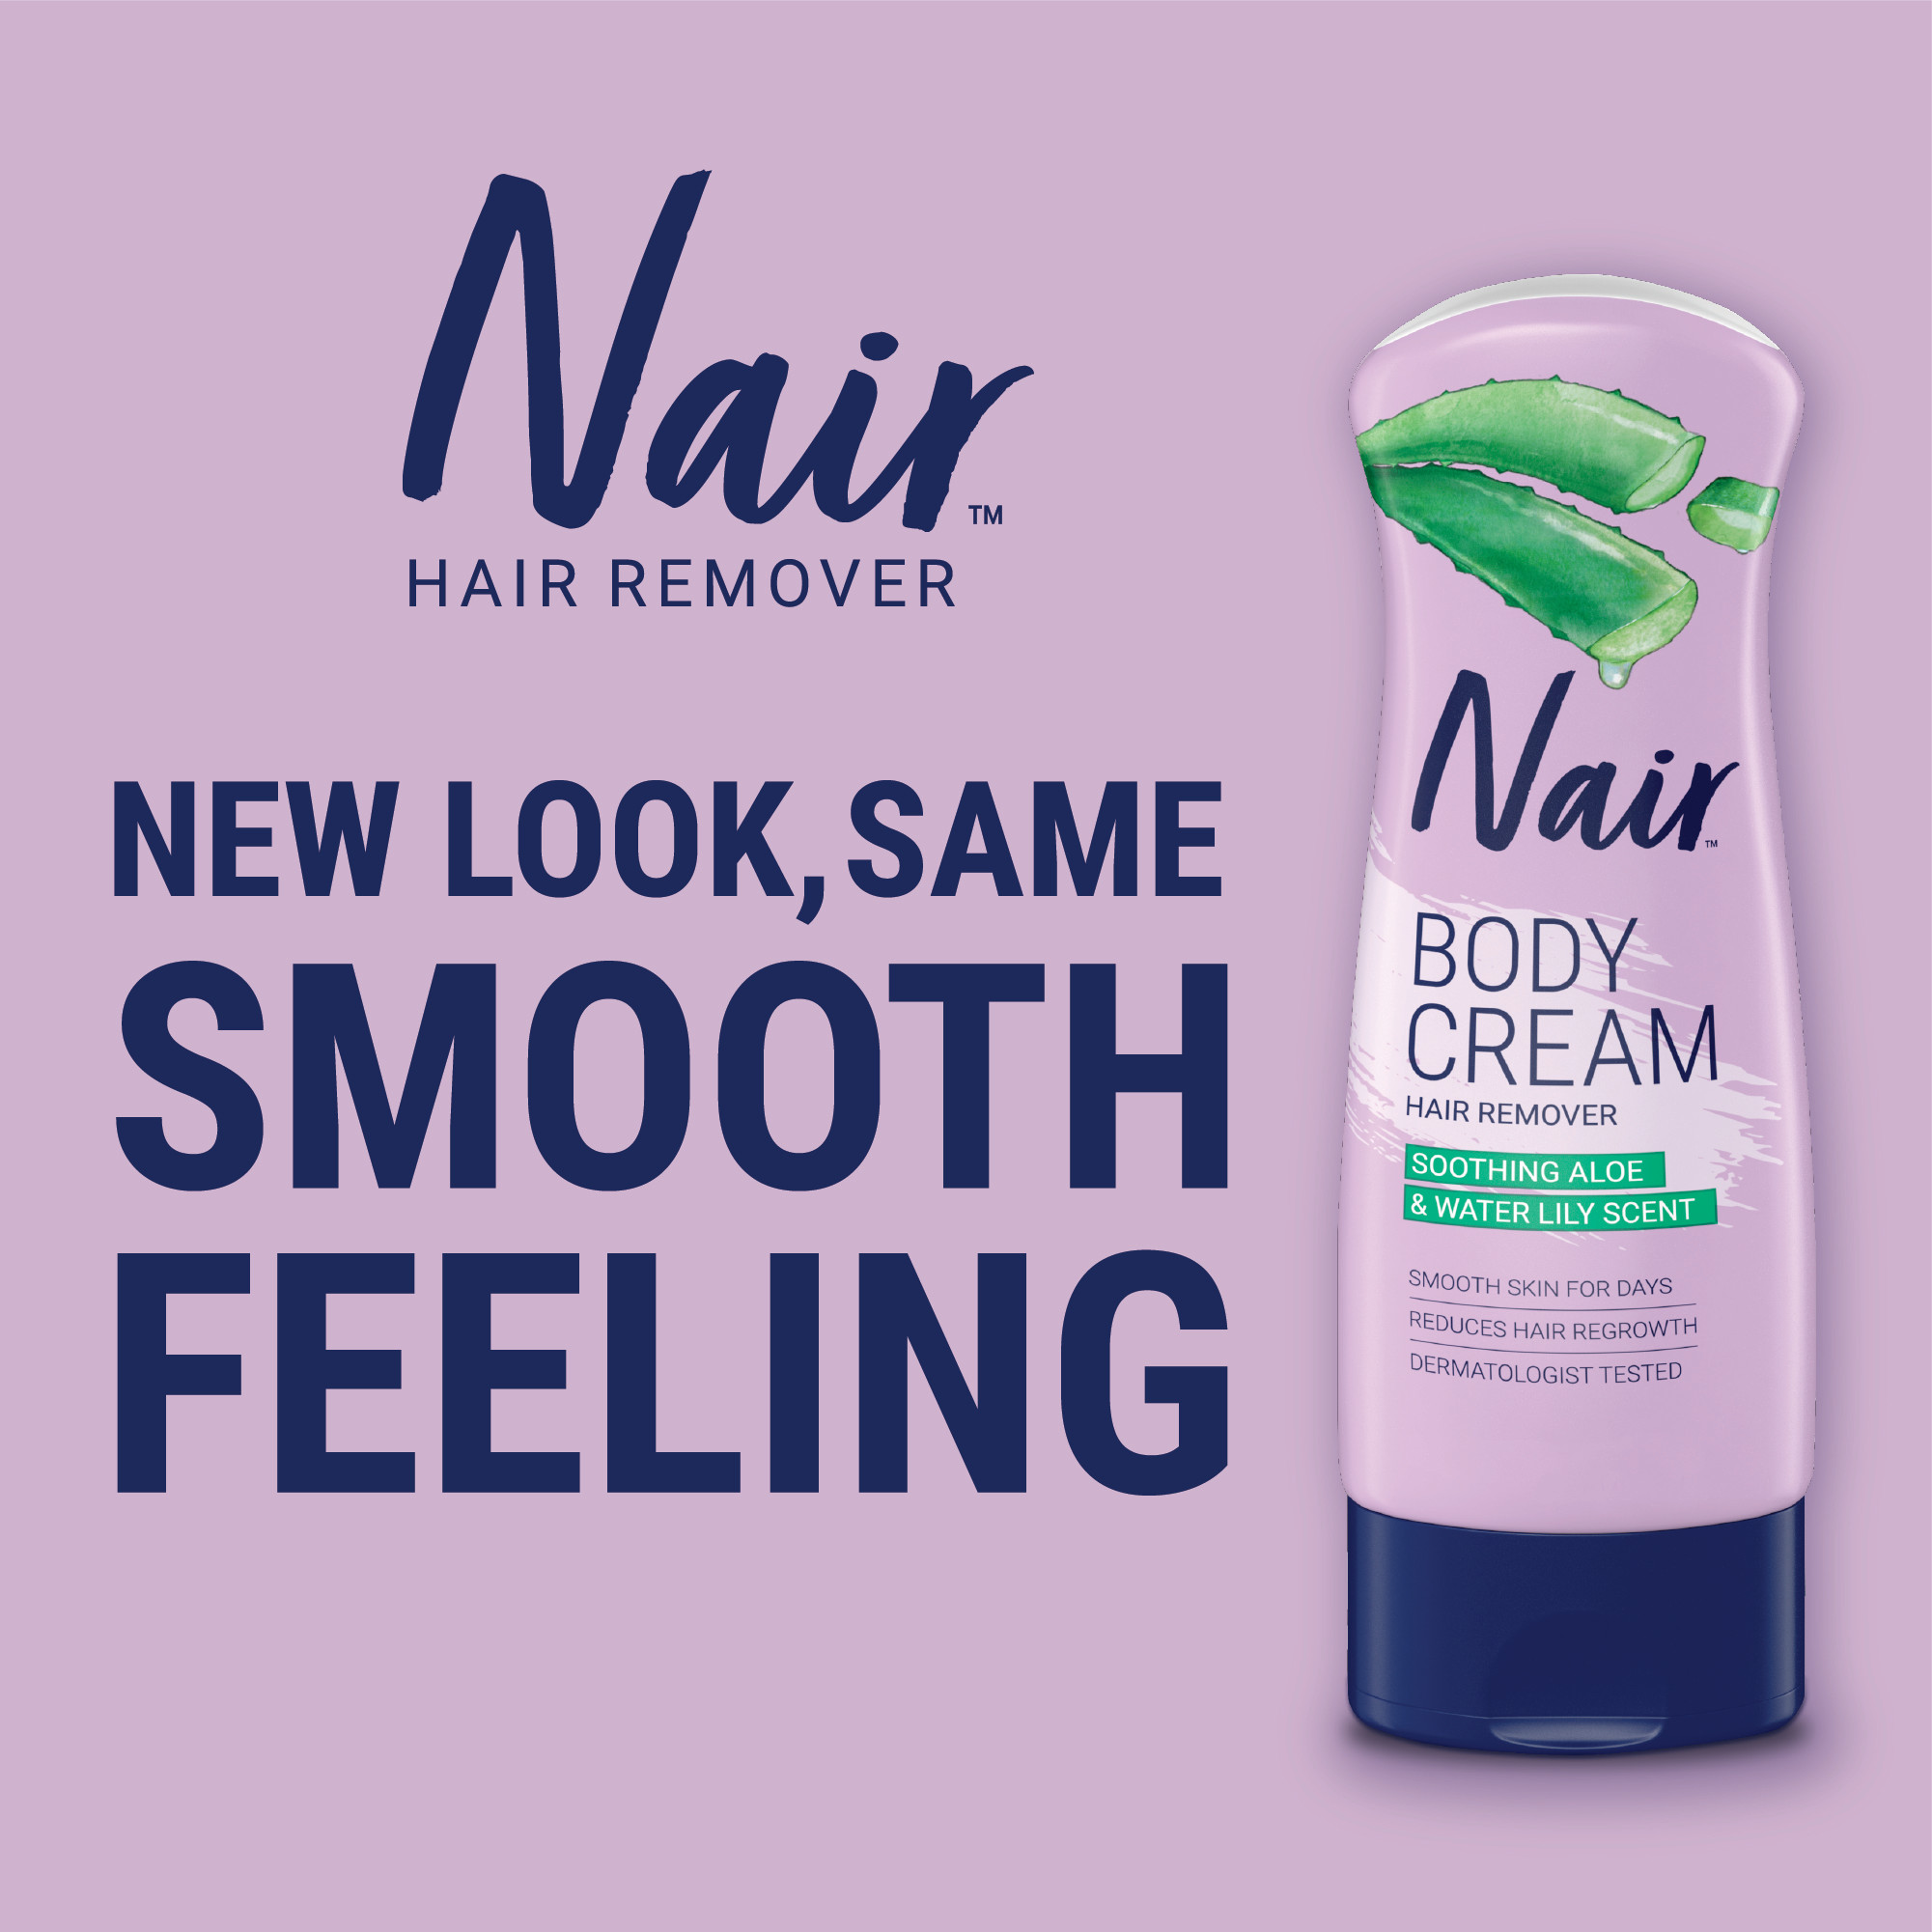 Nair Hair Removal Body Cream with Softening Baby Oil, Leg and Body Hair Remover - image 4 of 9